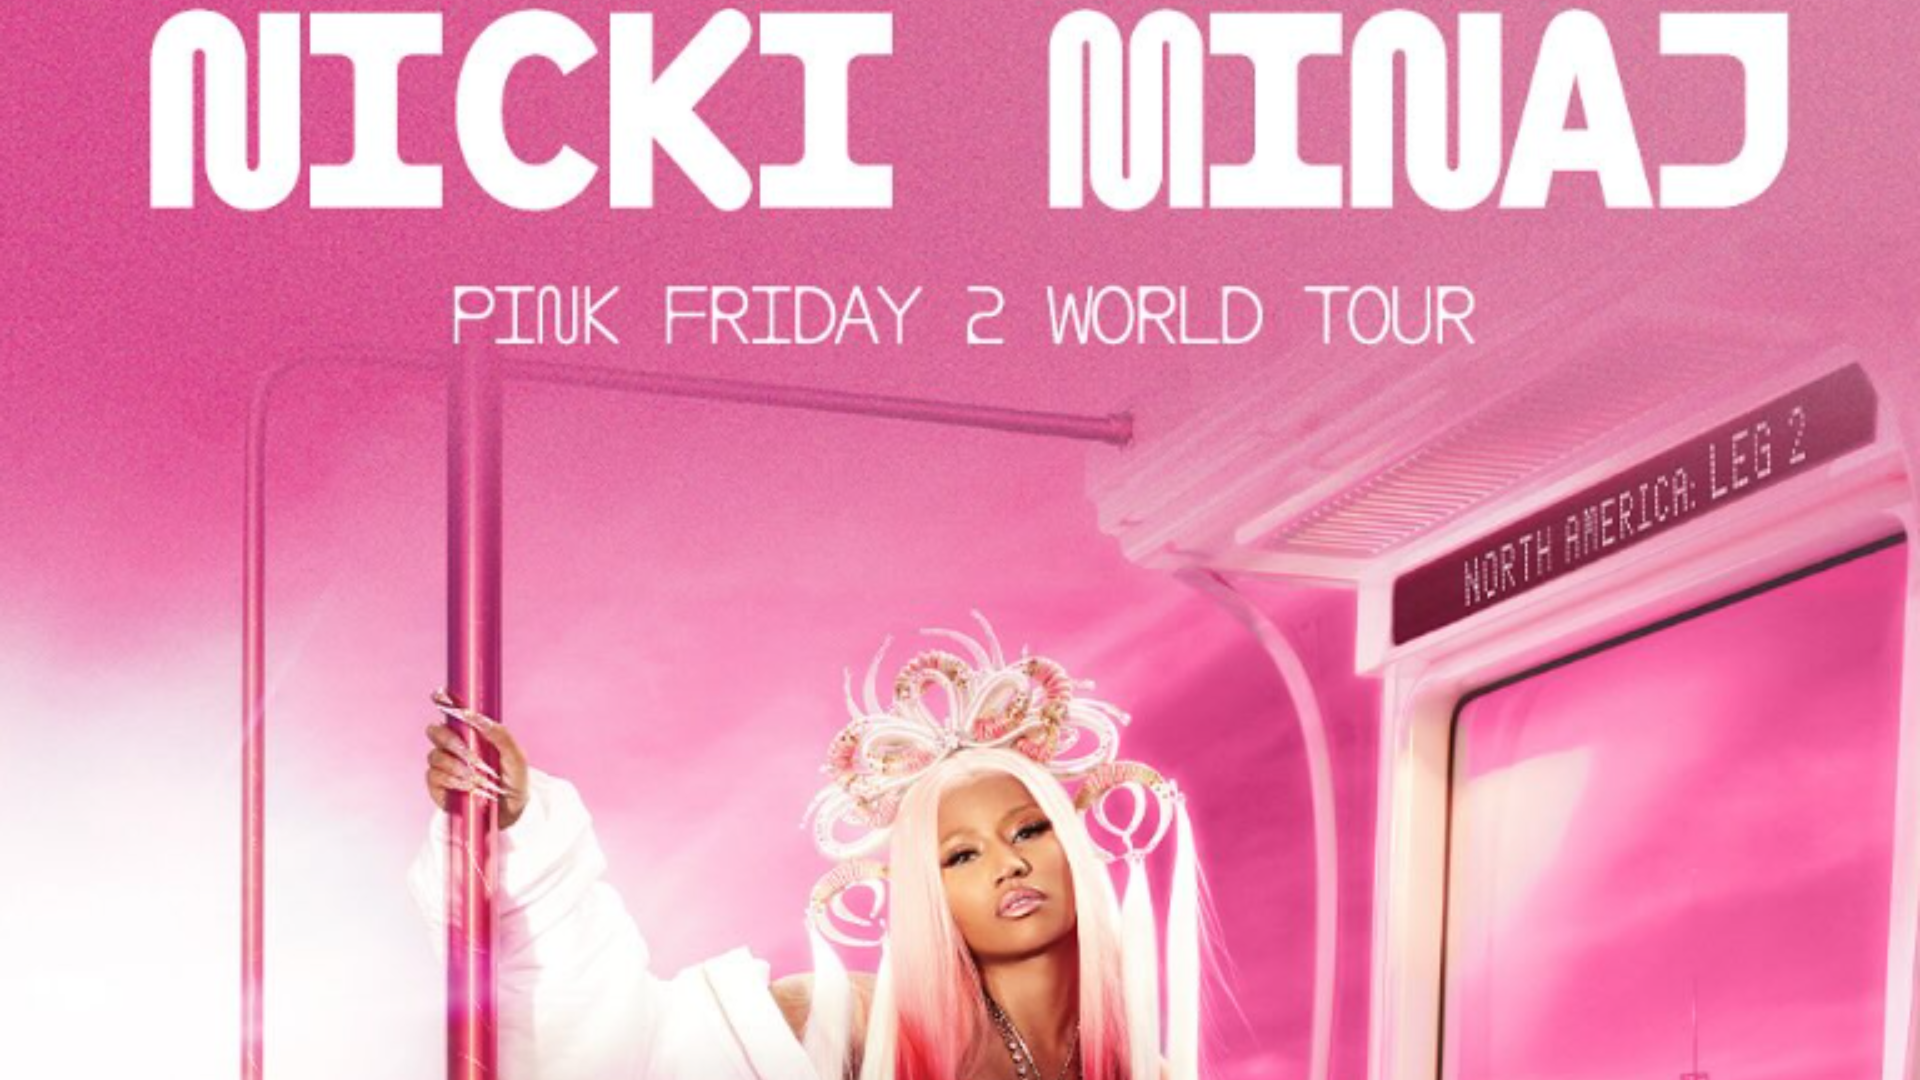 Did Nicki Minaj’s Pink Friday 2 Tour In The UK Get Canceled? Did She Face Legal Troubles In Amsterdam?